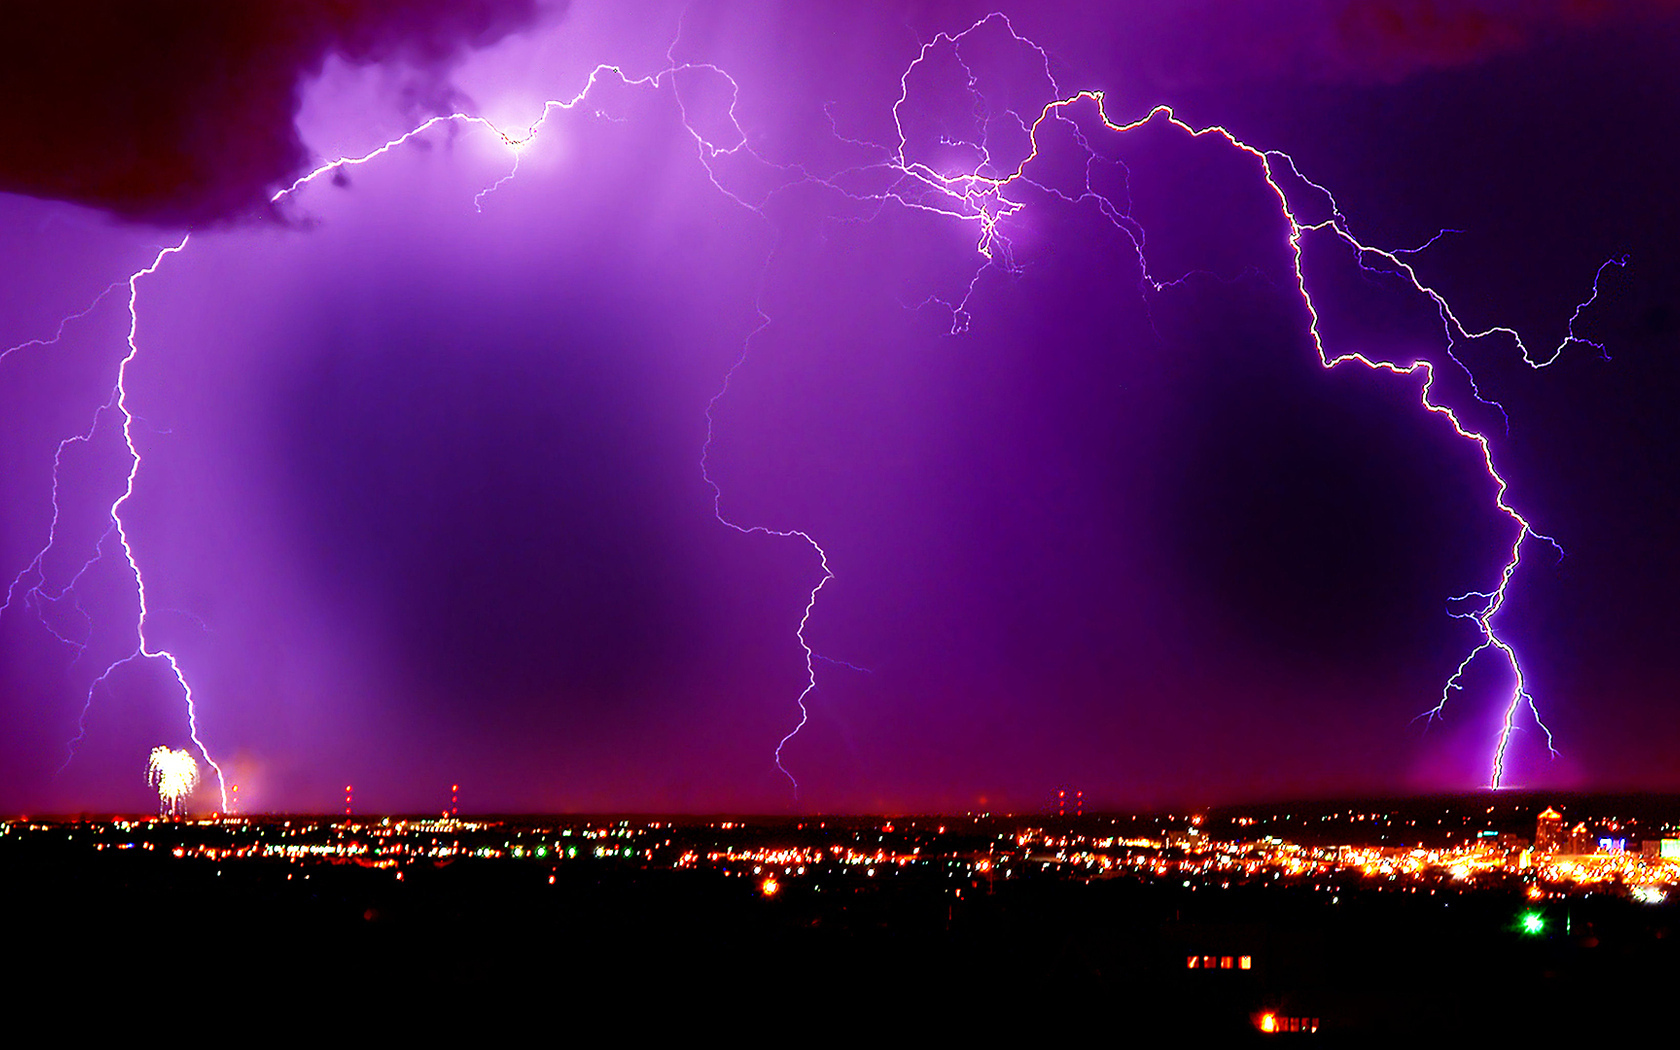 Cool Background Of Lightning Image Amp Pictures Becuo